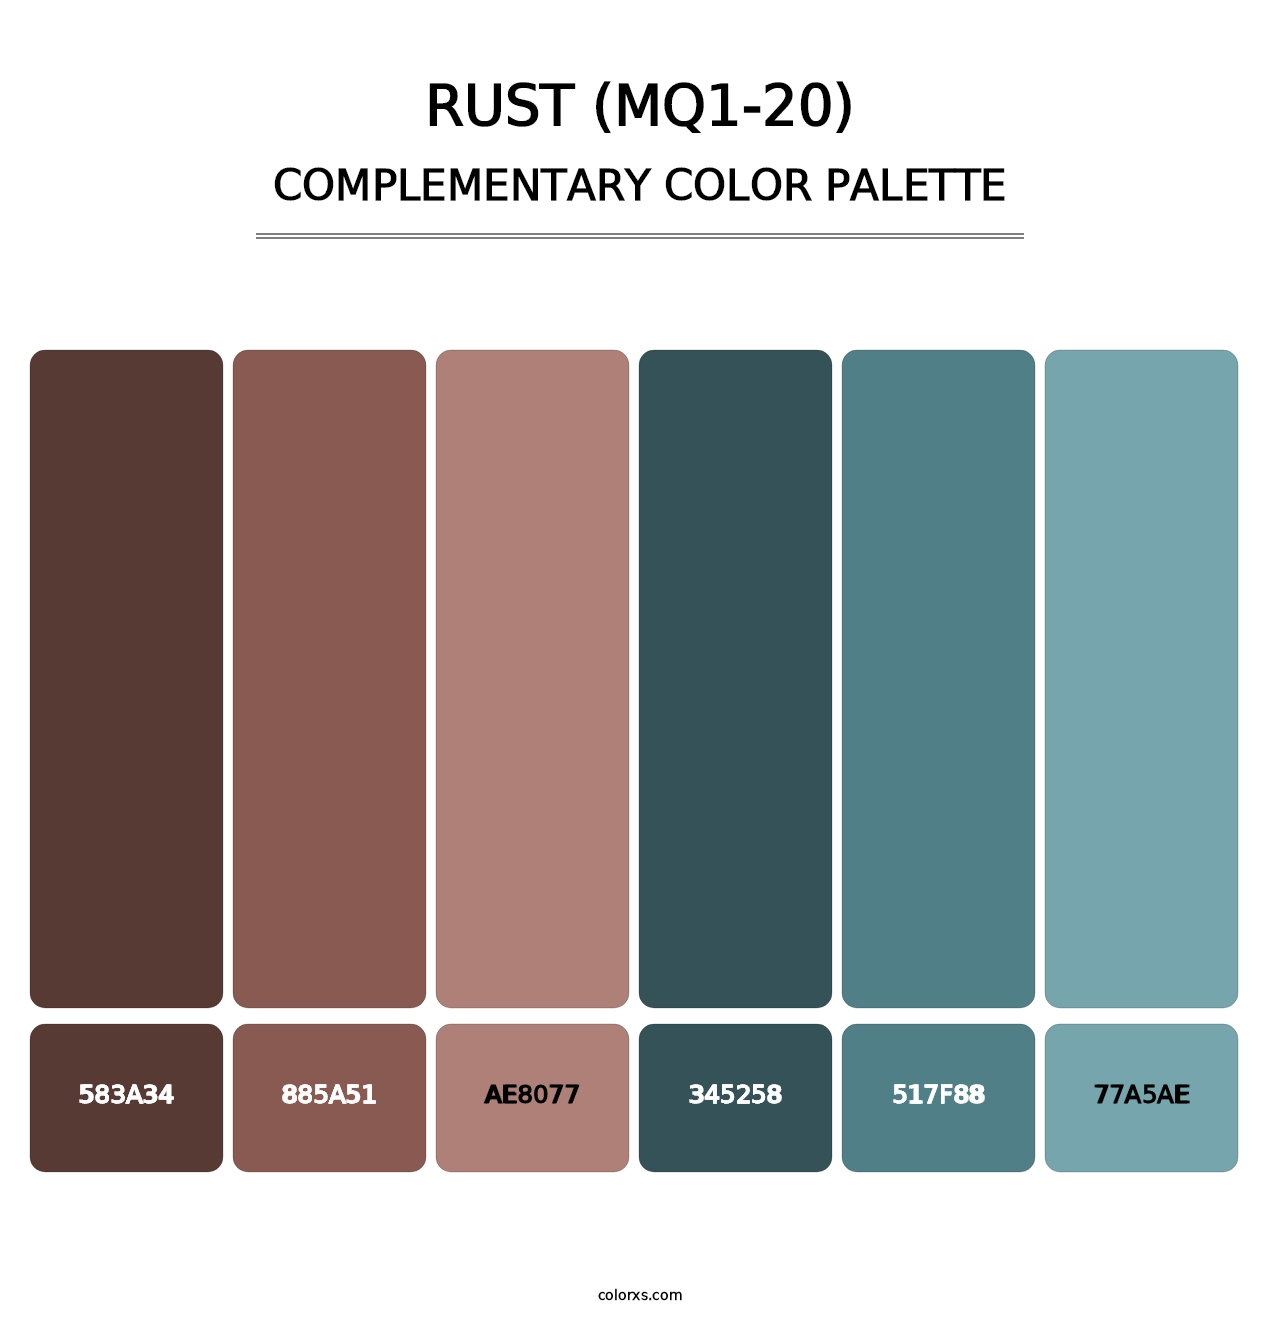 Rust (MQ1-20) - Complementary Color Palette